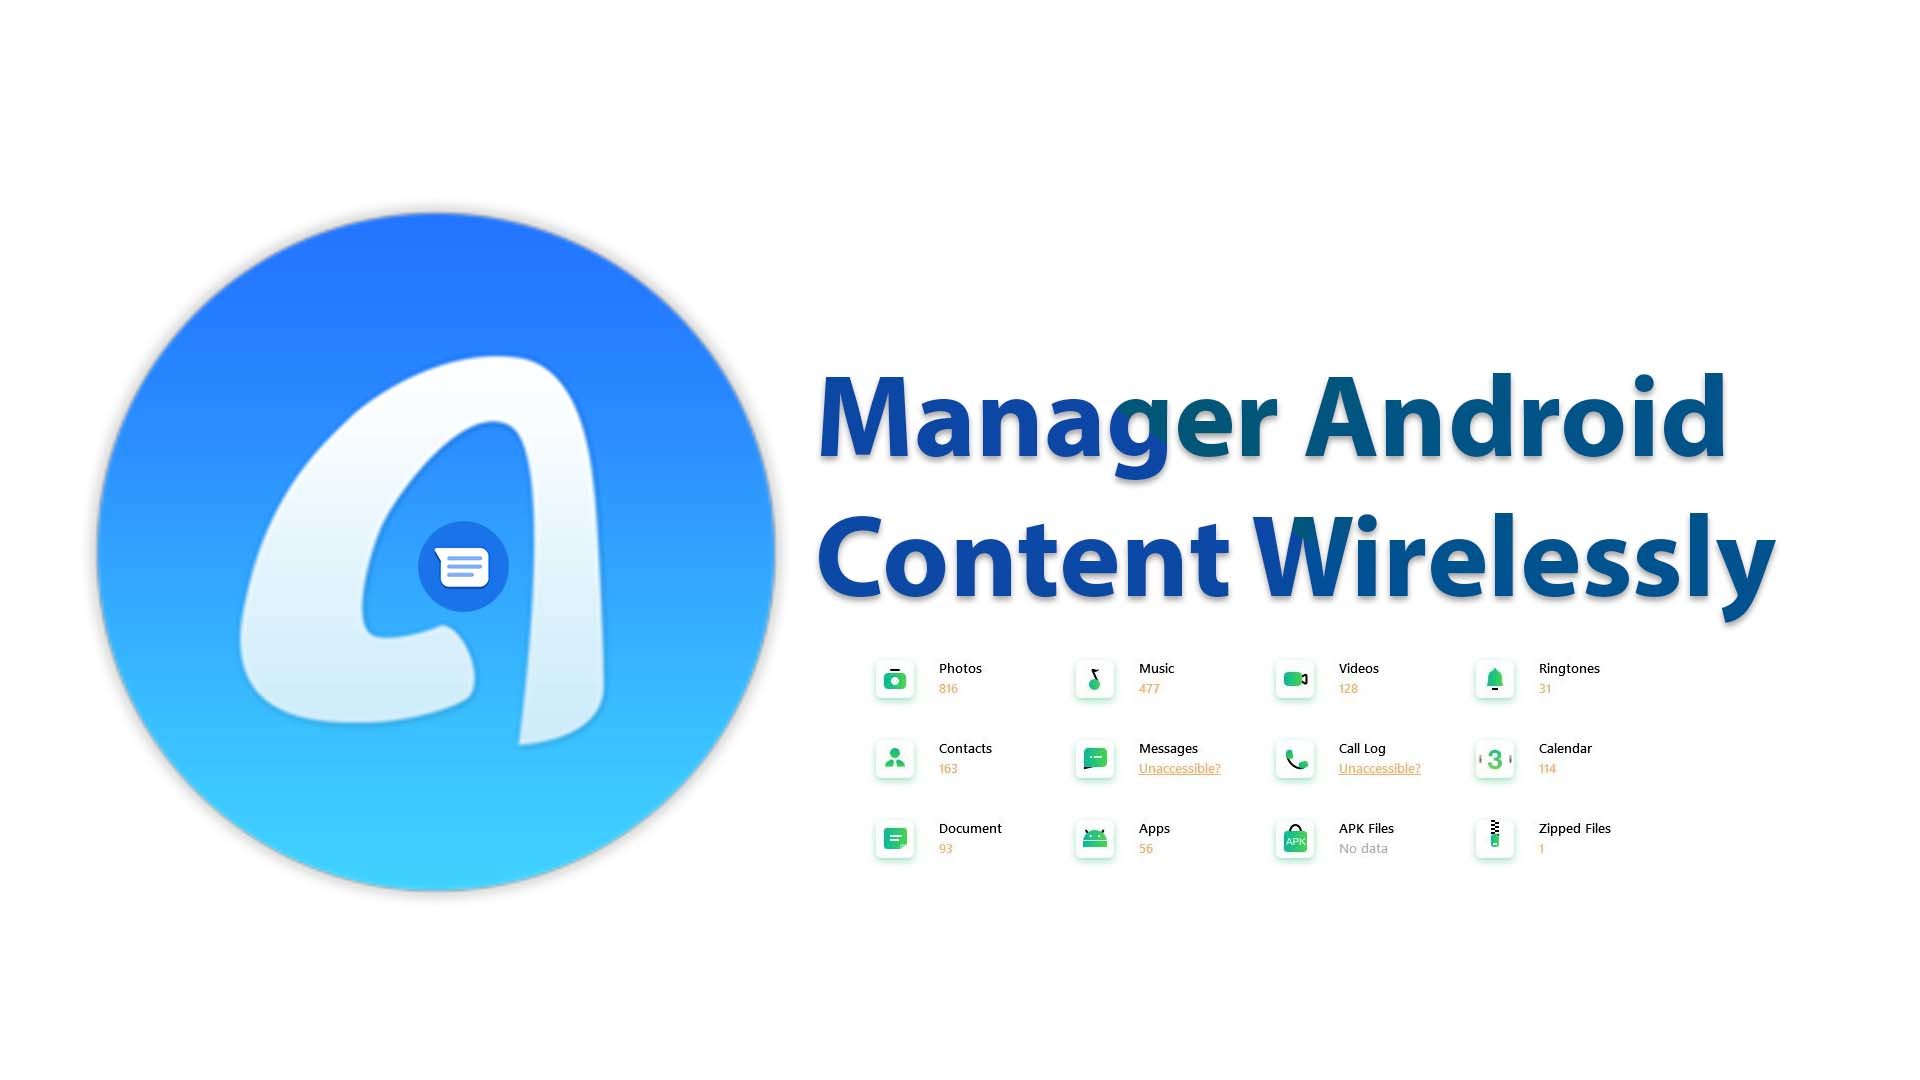 Wirelessly Manage Android Content Across Desktop, Web, and App